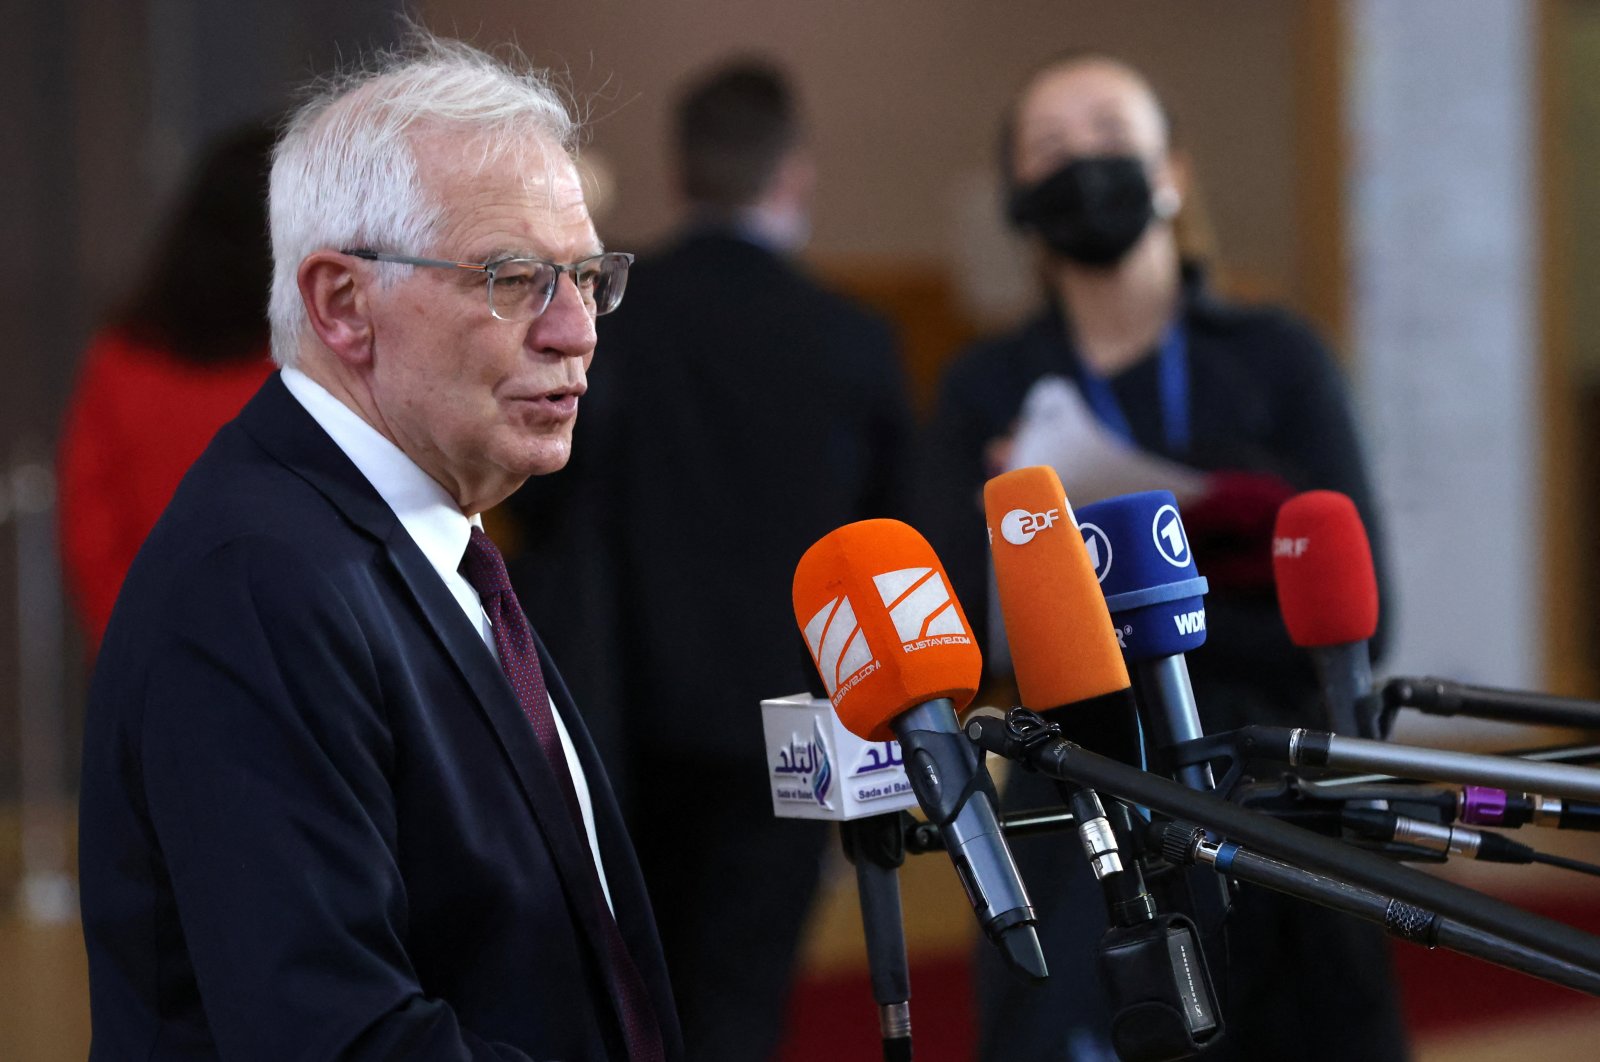 European Union Foreign Policy Chief Josep Borell speaks to the media before a meeting with European Union Foreign Ministers in Brussels, Belgium, Feb. 21, 2022. (Reuters Photo)